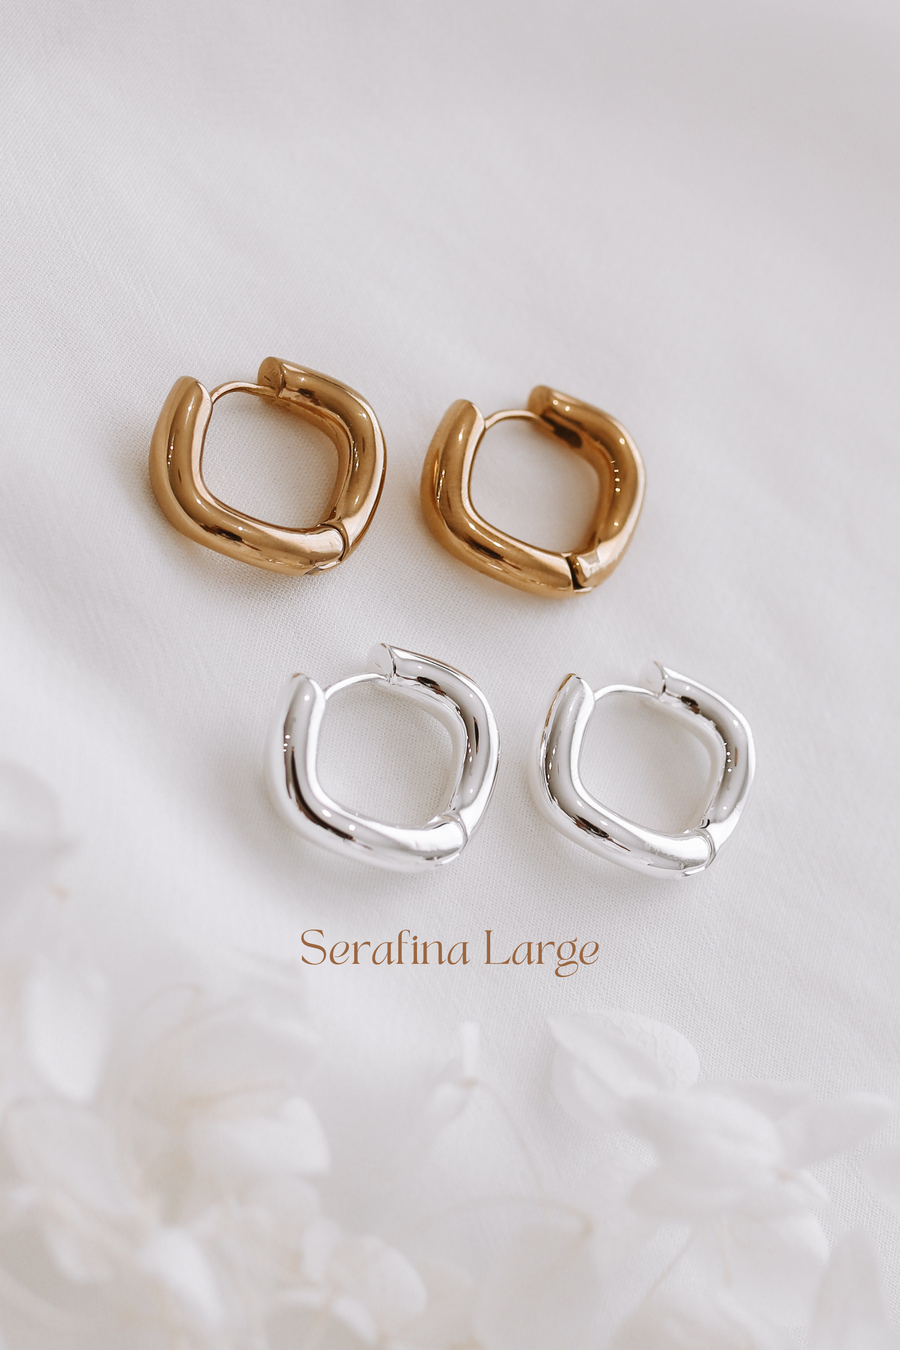 Serafina - Gold or Silver Stainless Steel Hoops